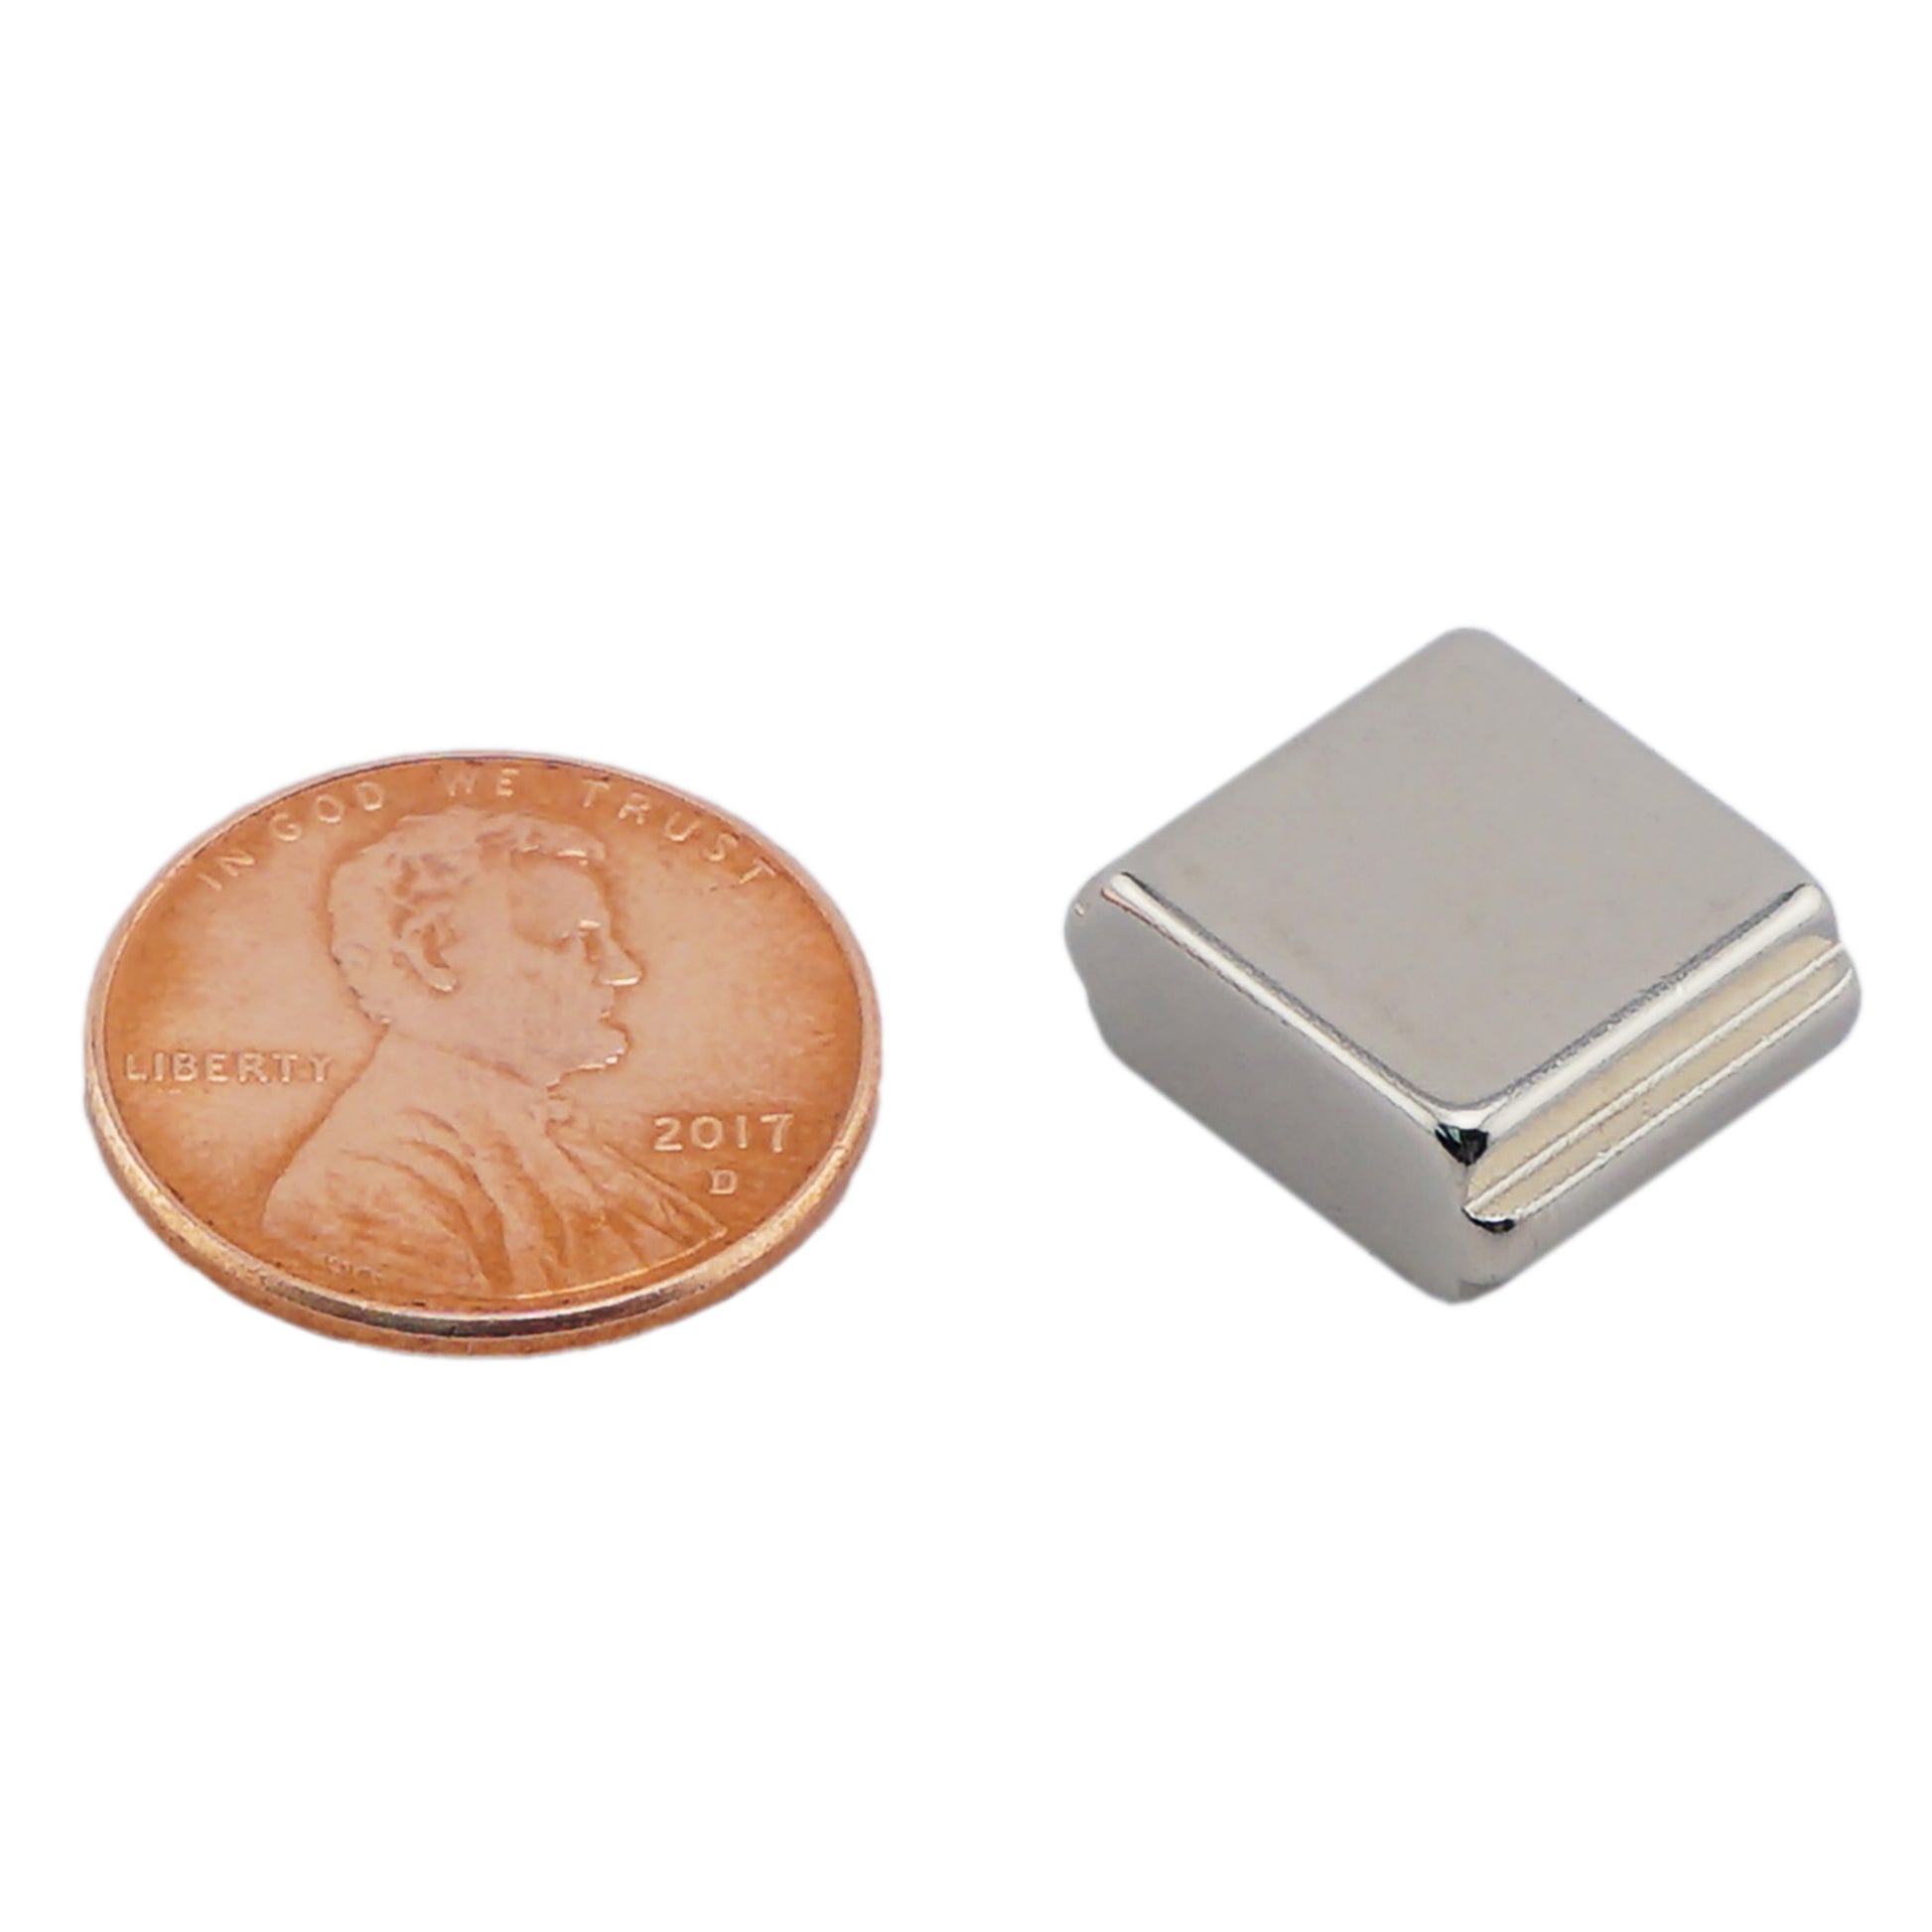 Load image into Gallery viewer, NBGO002501N Neodymium Block Magnet with groove - Compared to Penny for Size Reference